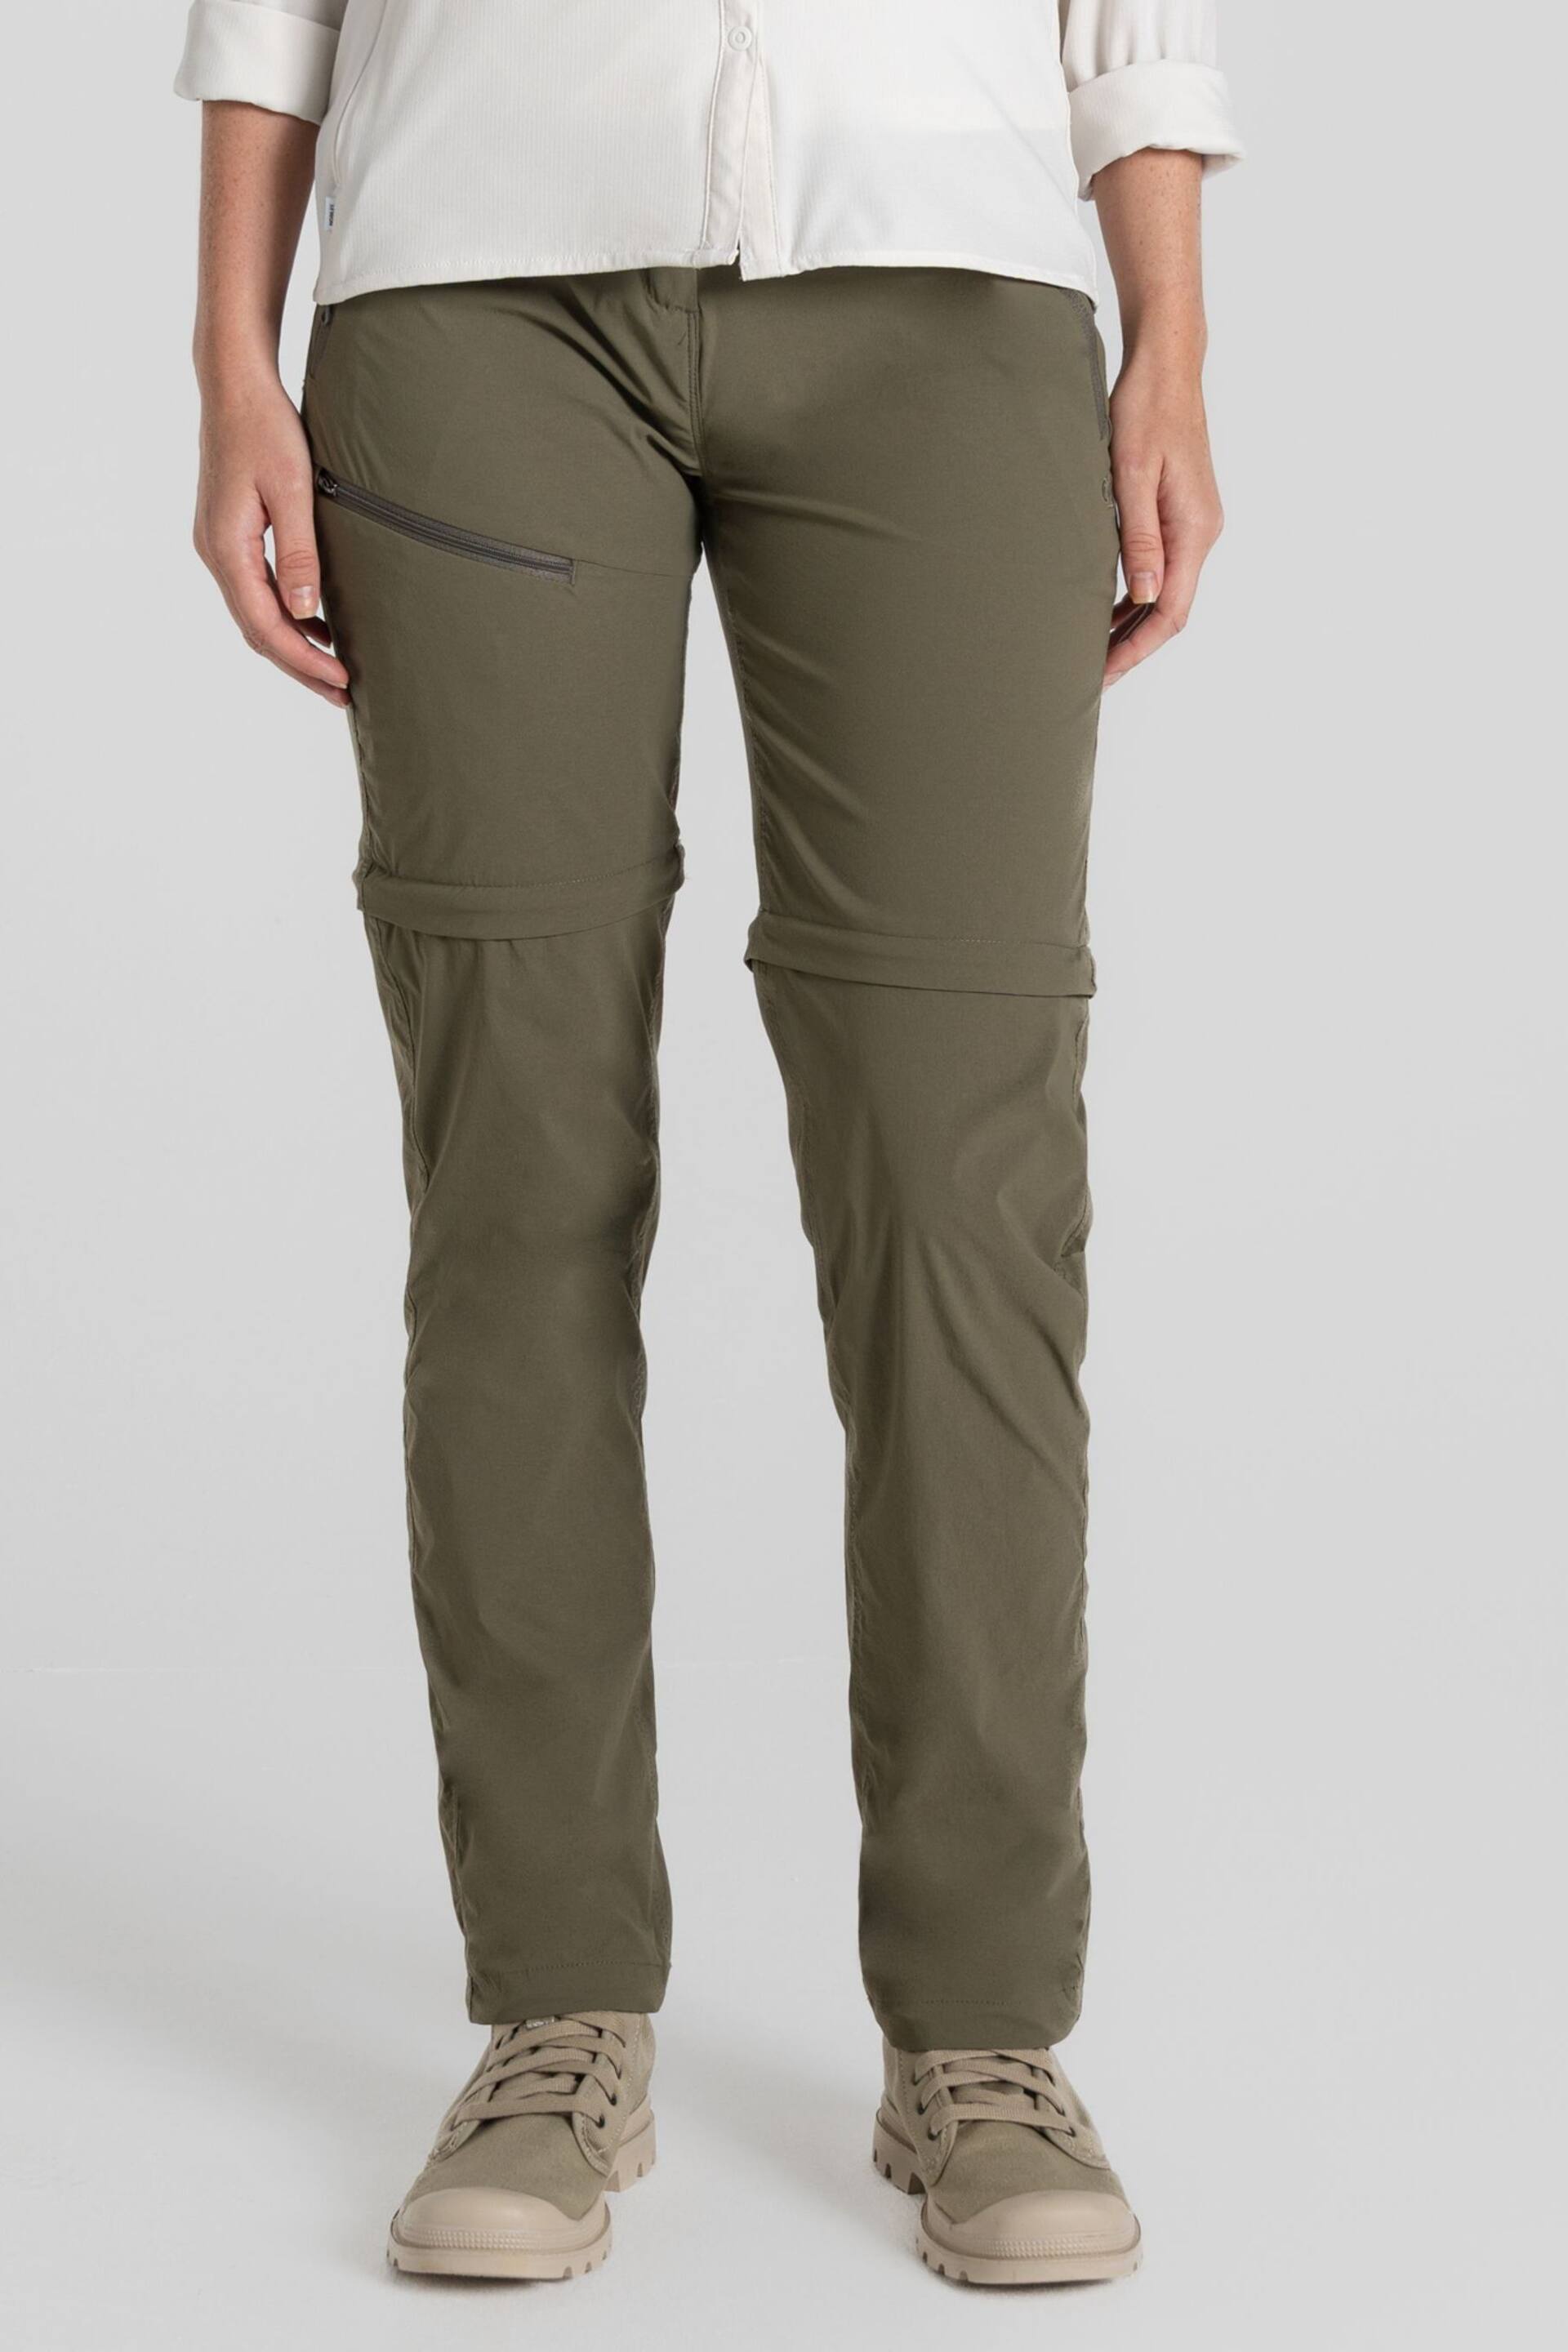 Craghoppers Green NL PRO Convertible III Trousers - Image 1 of 7